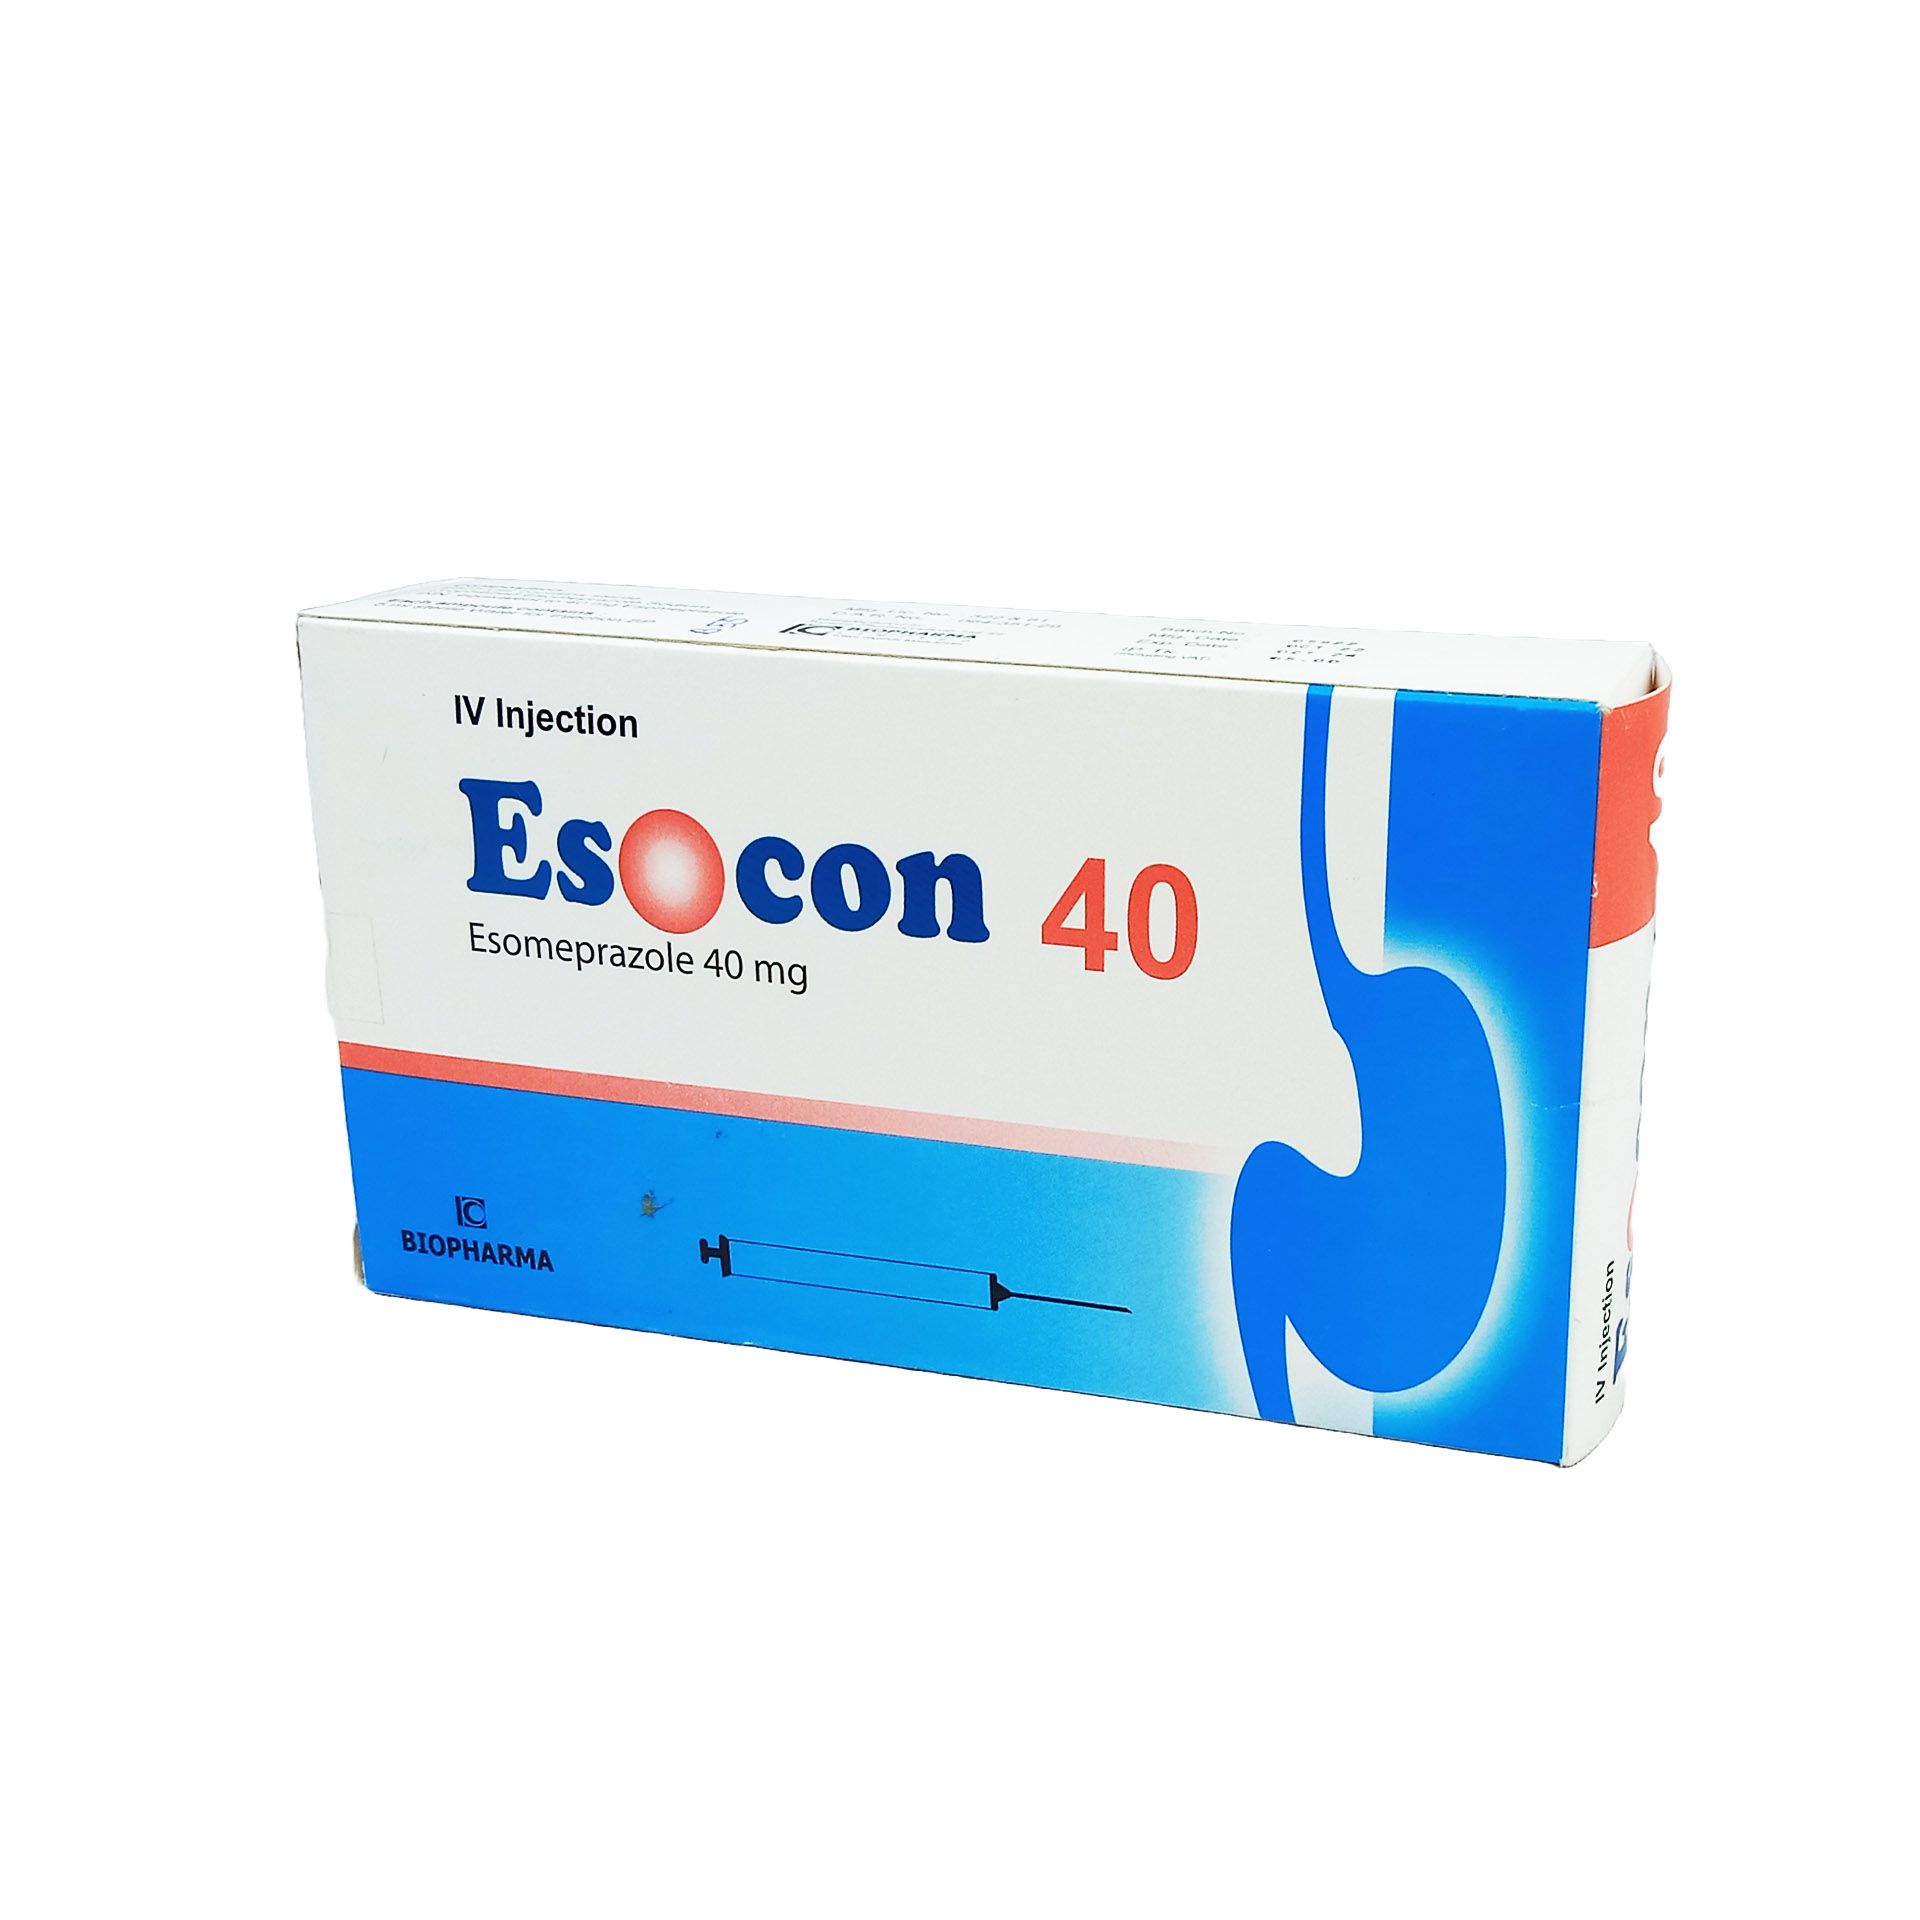 Esocon 40 IV 40mg/vial Injection